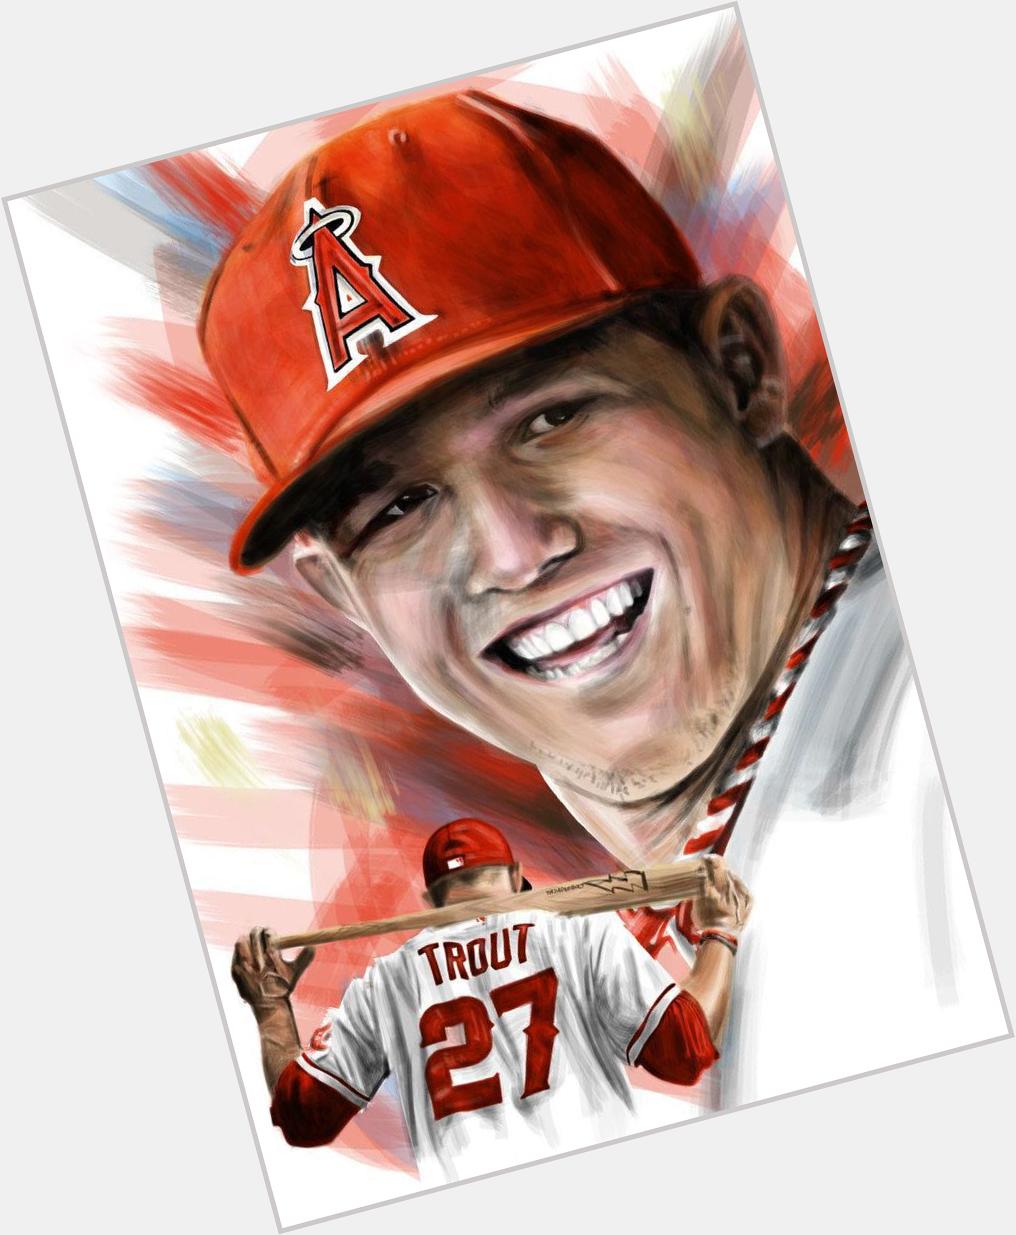 Happy Birthday Mike Trout 24 today and best player in MLB 